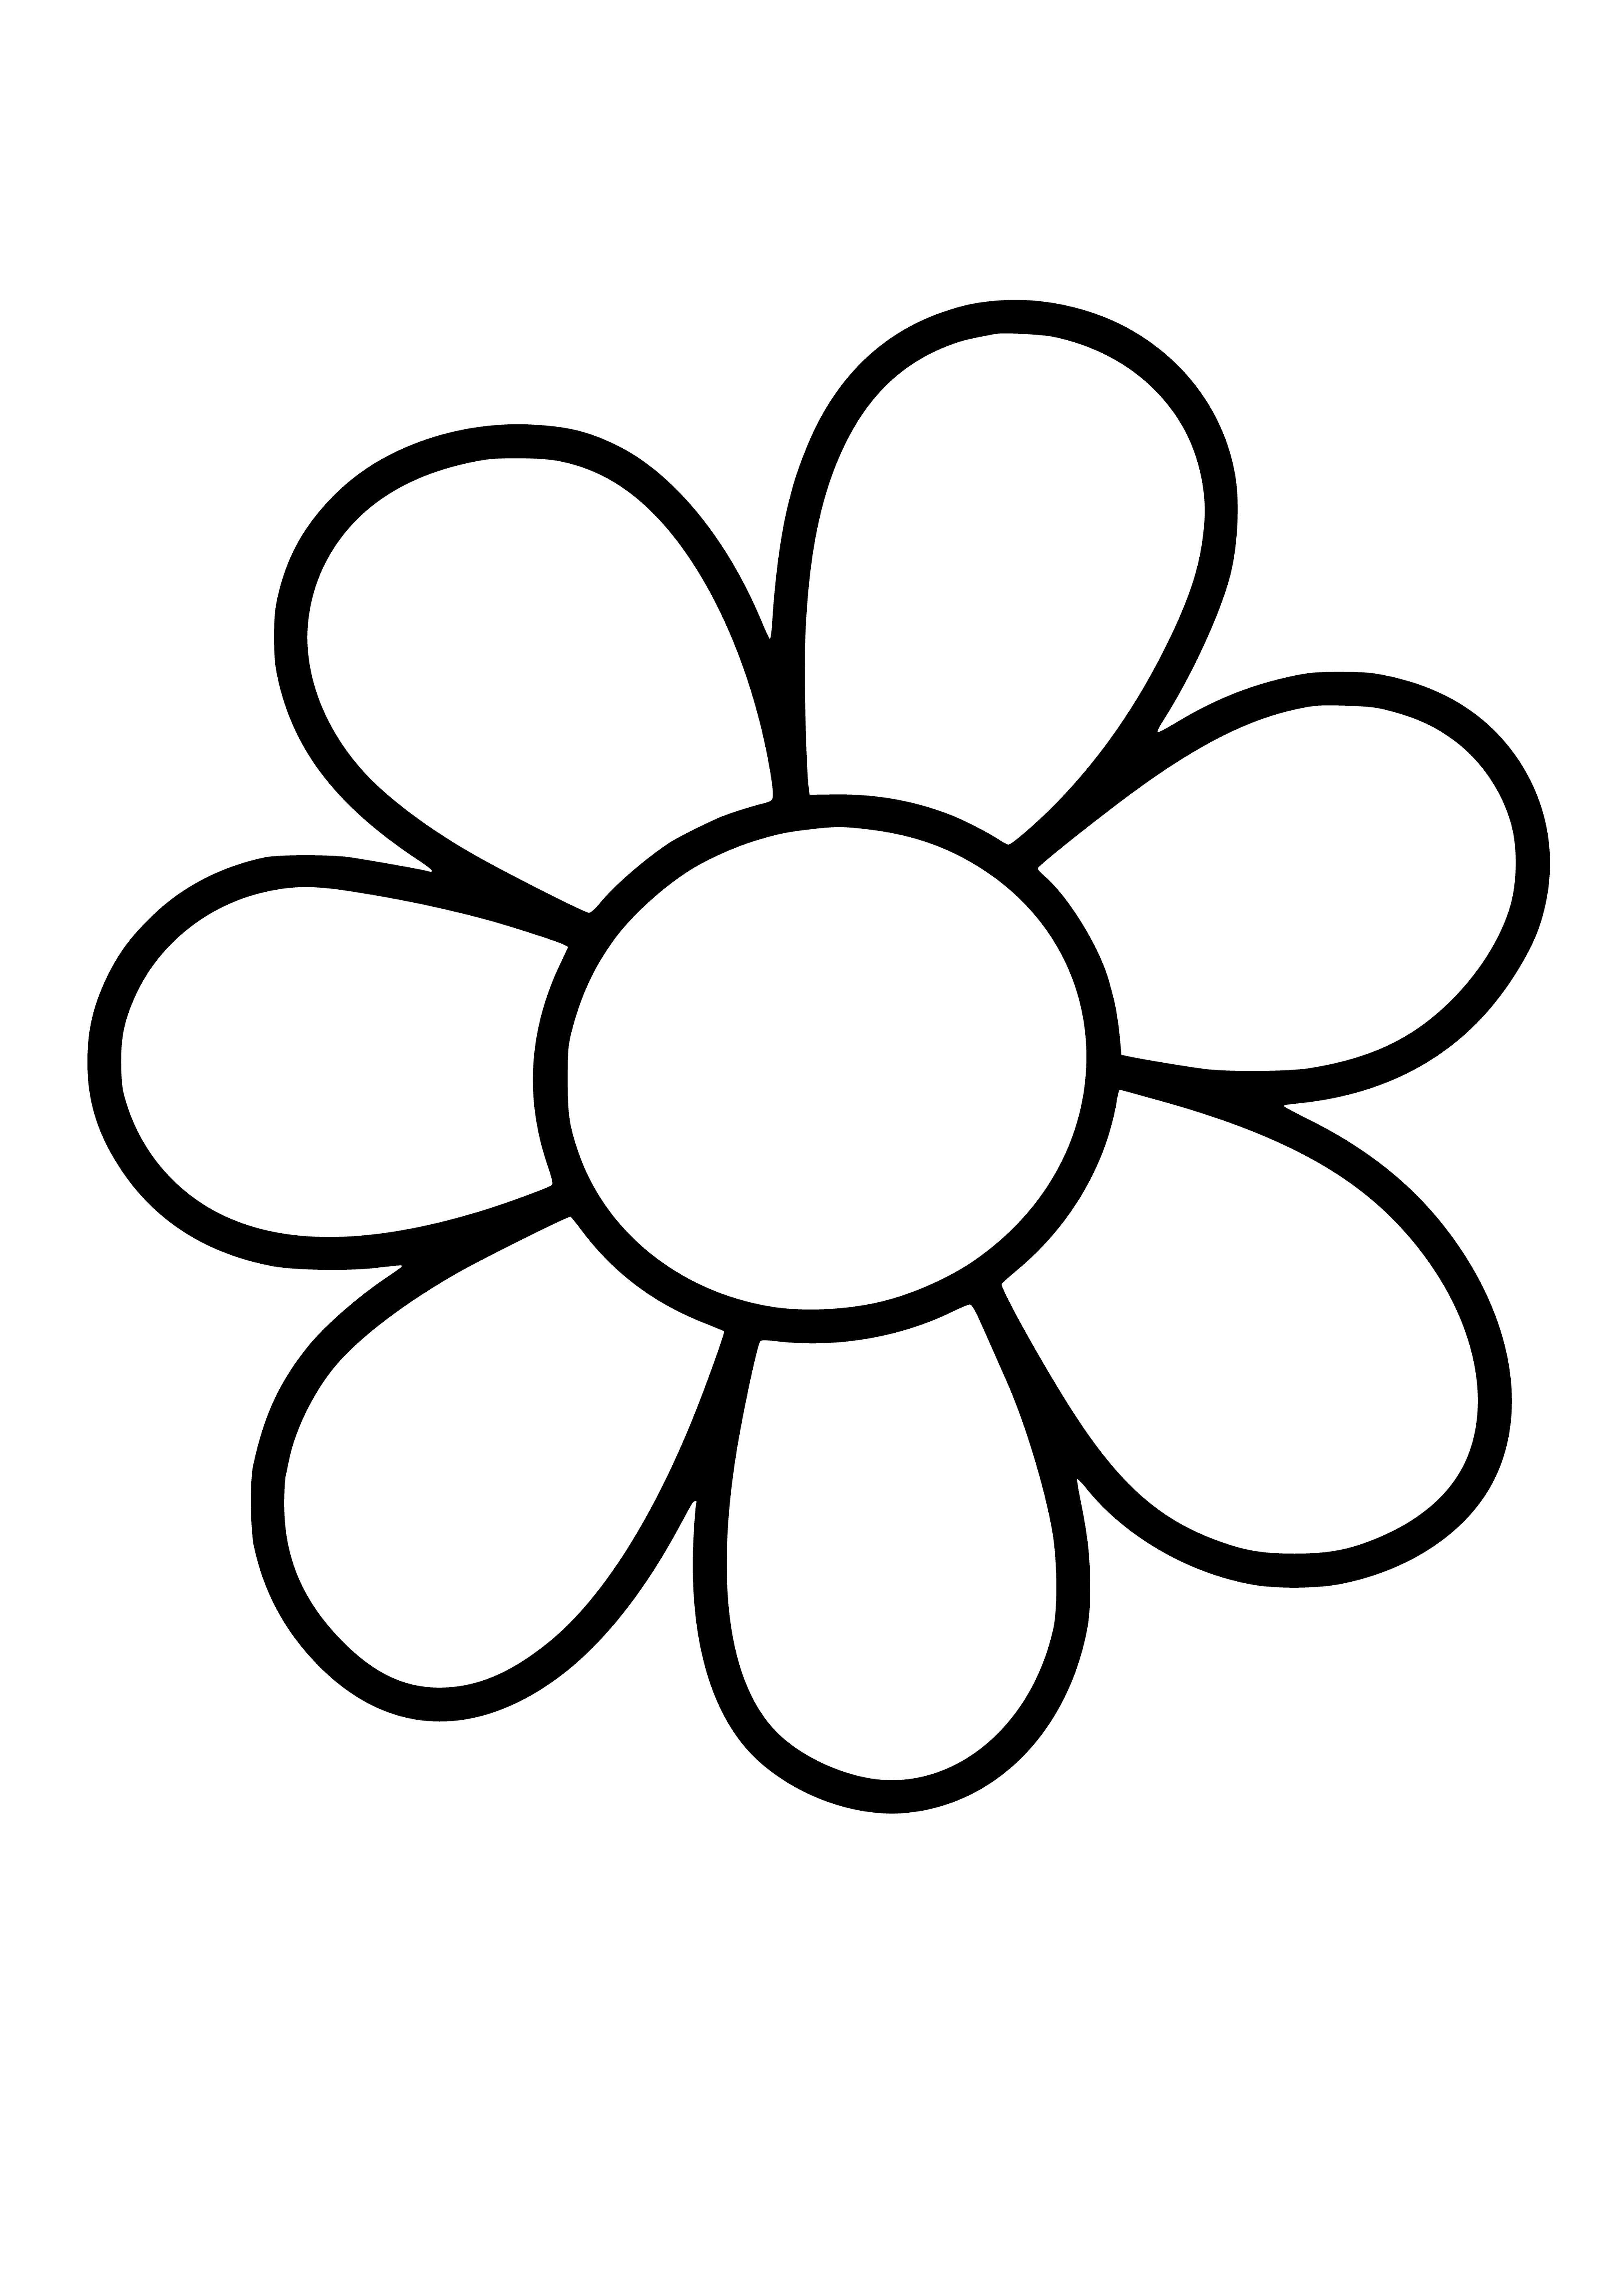 coloring page: A yellow flower with a textured, ruffled petal and black center, on a green stem with leaves near the base. #Nature #Life